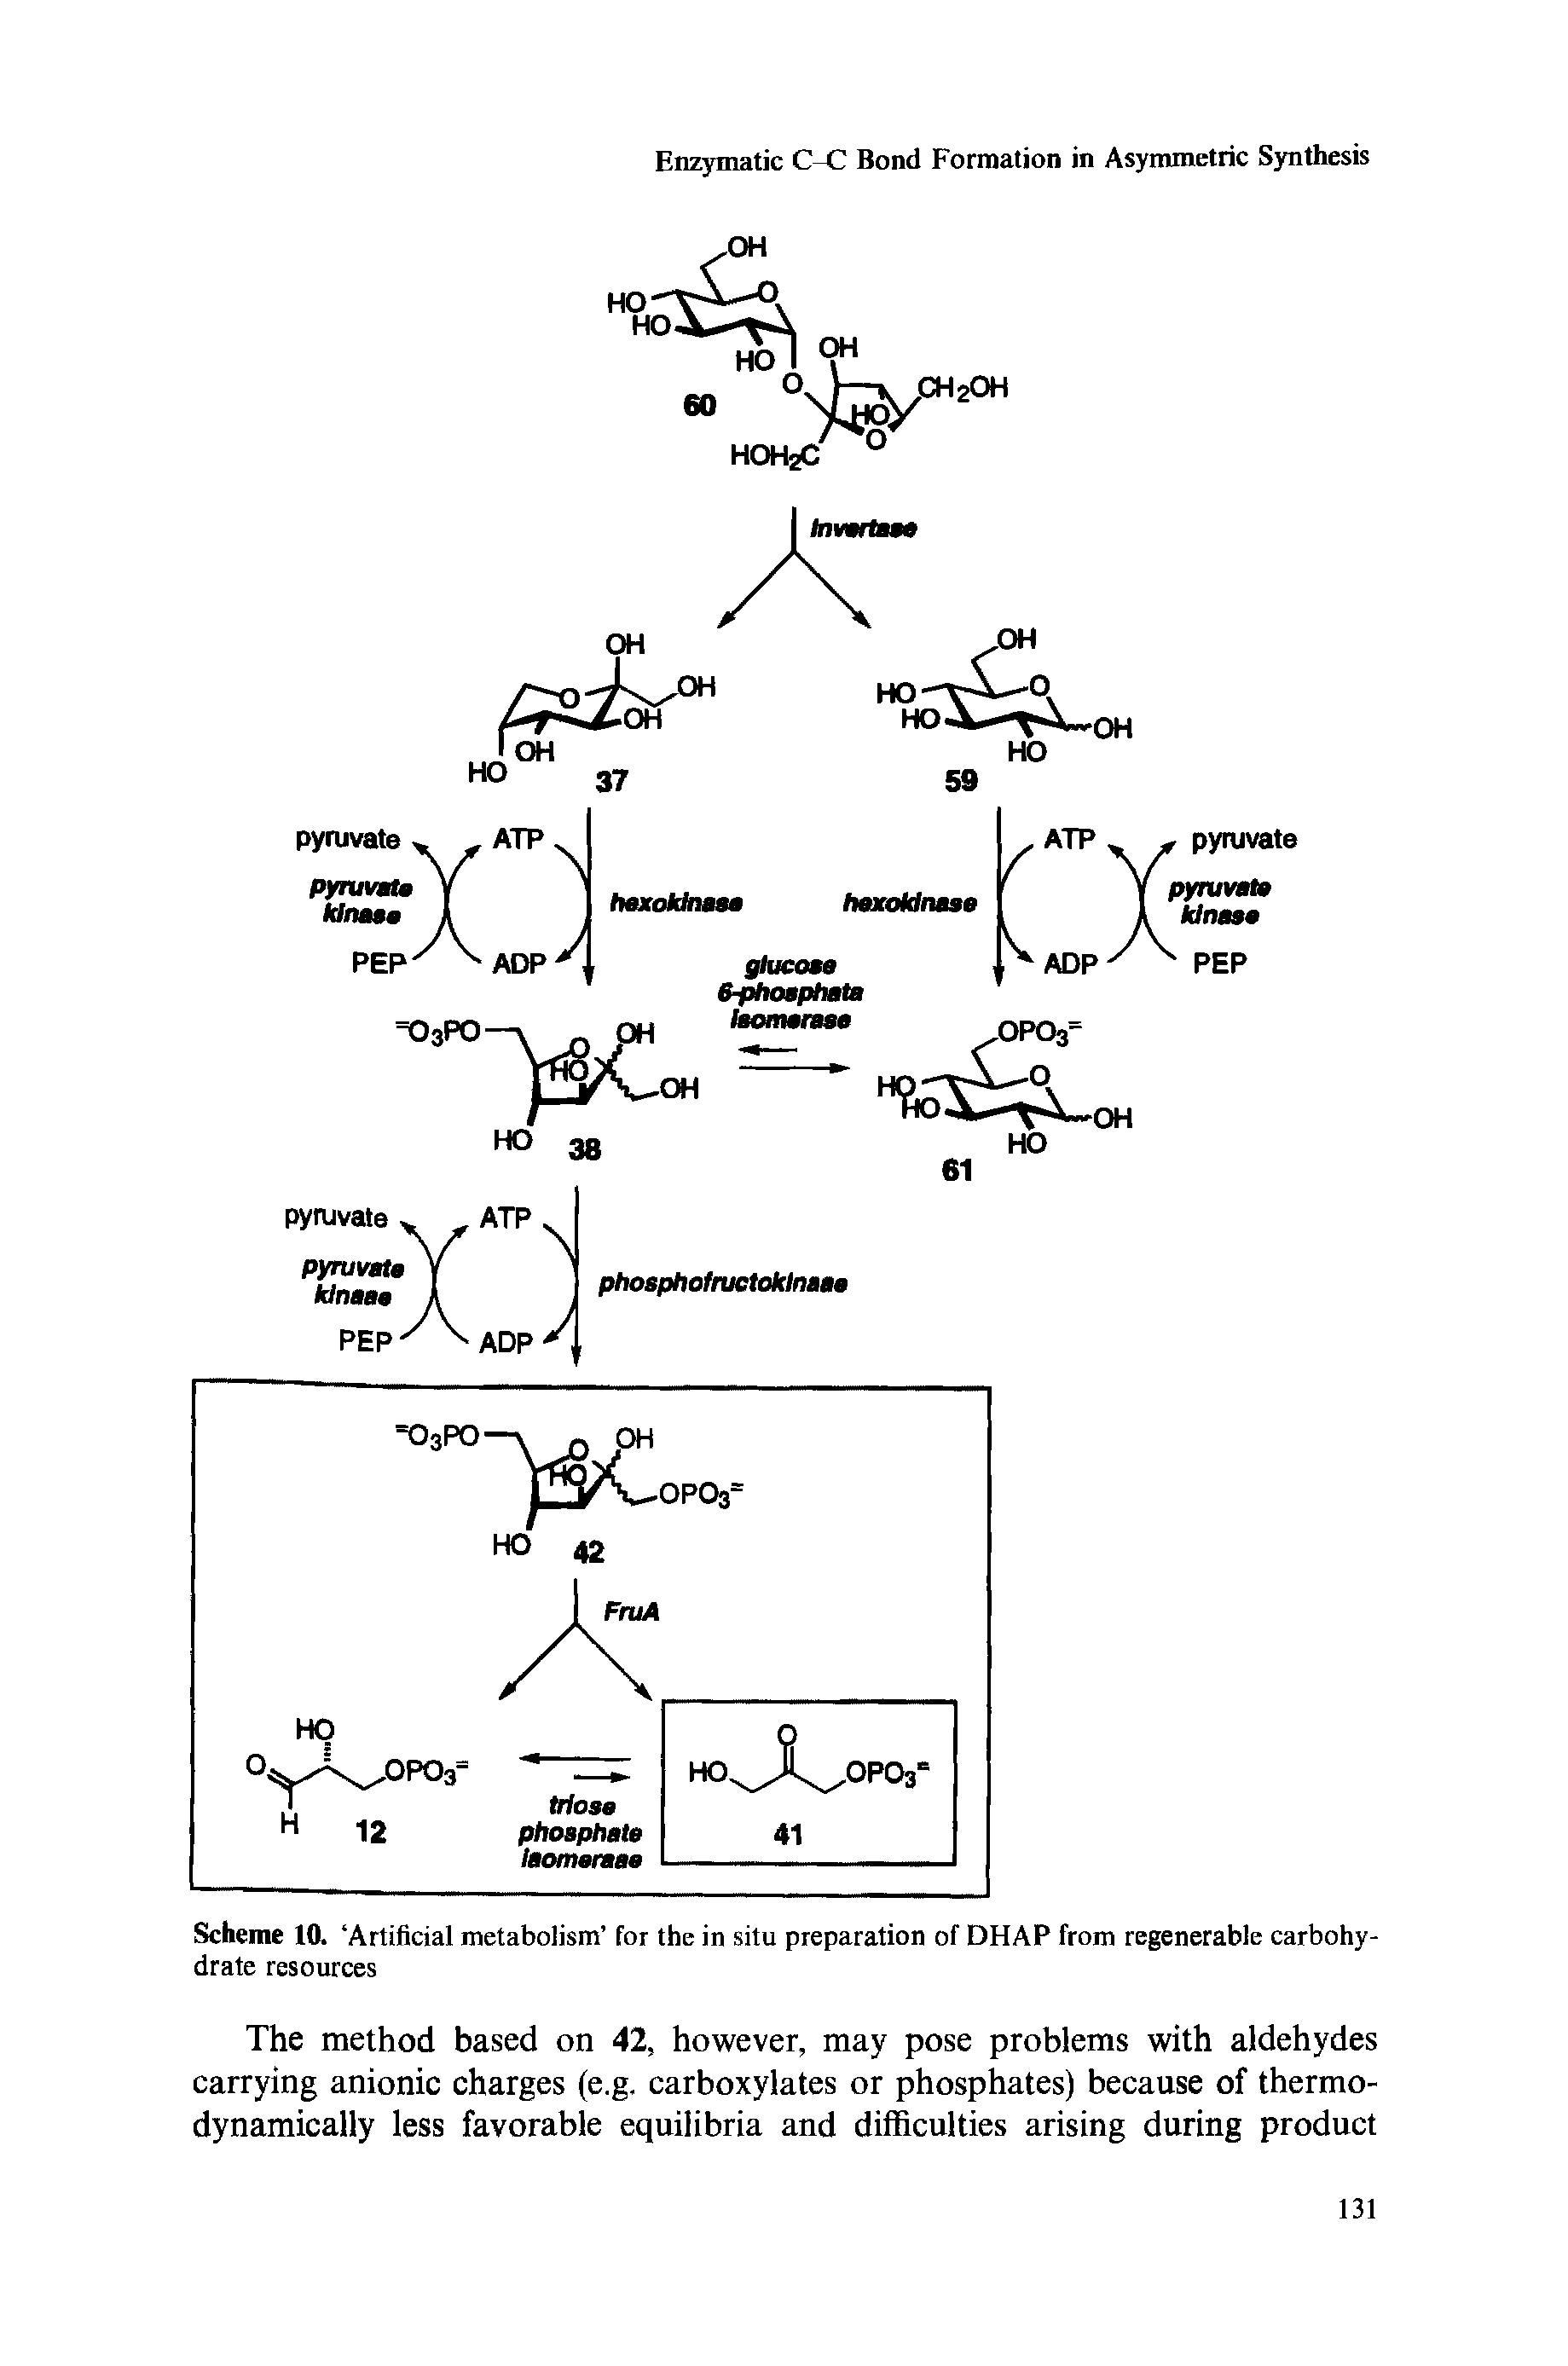 Scheme 10. Artificial metabolism for the in situ preparation of DHAP from regenerable carbohydrate resources...